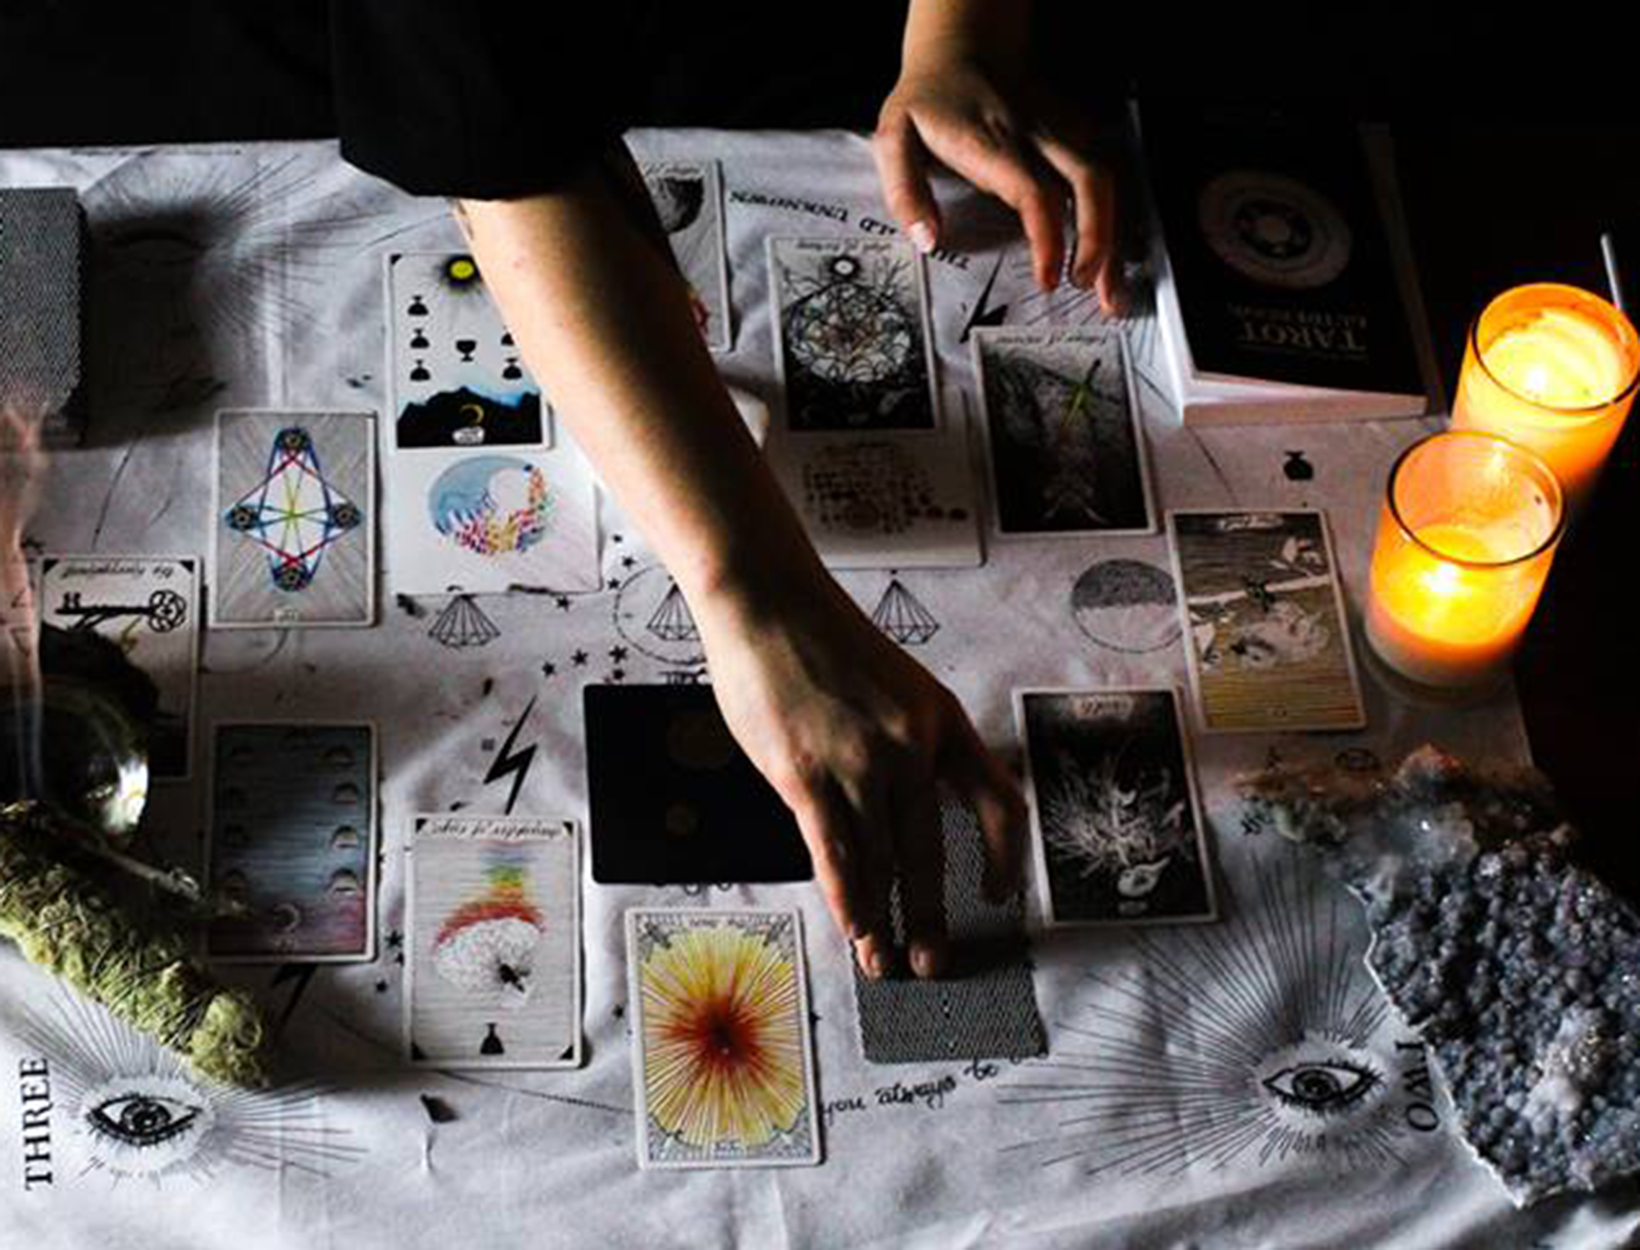 What to Expect From Your Initial Tarot Card Reading Session?